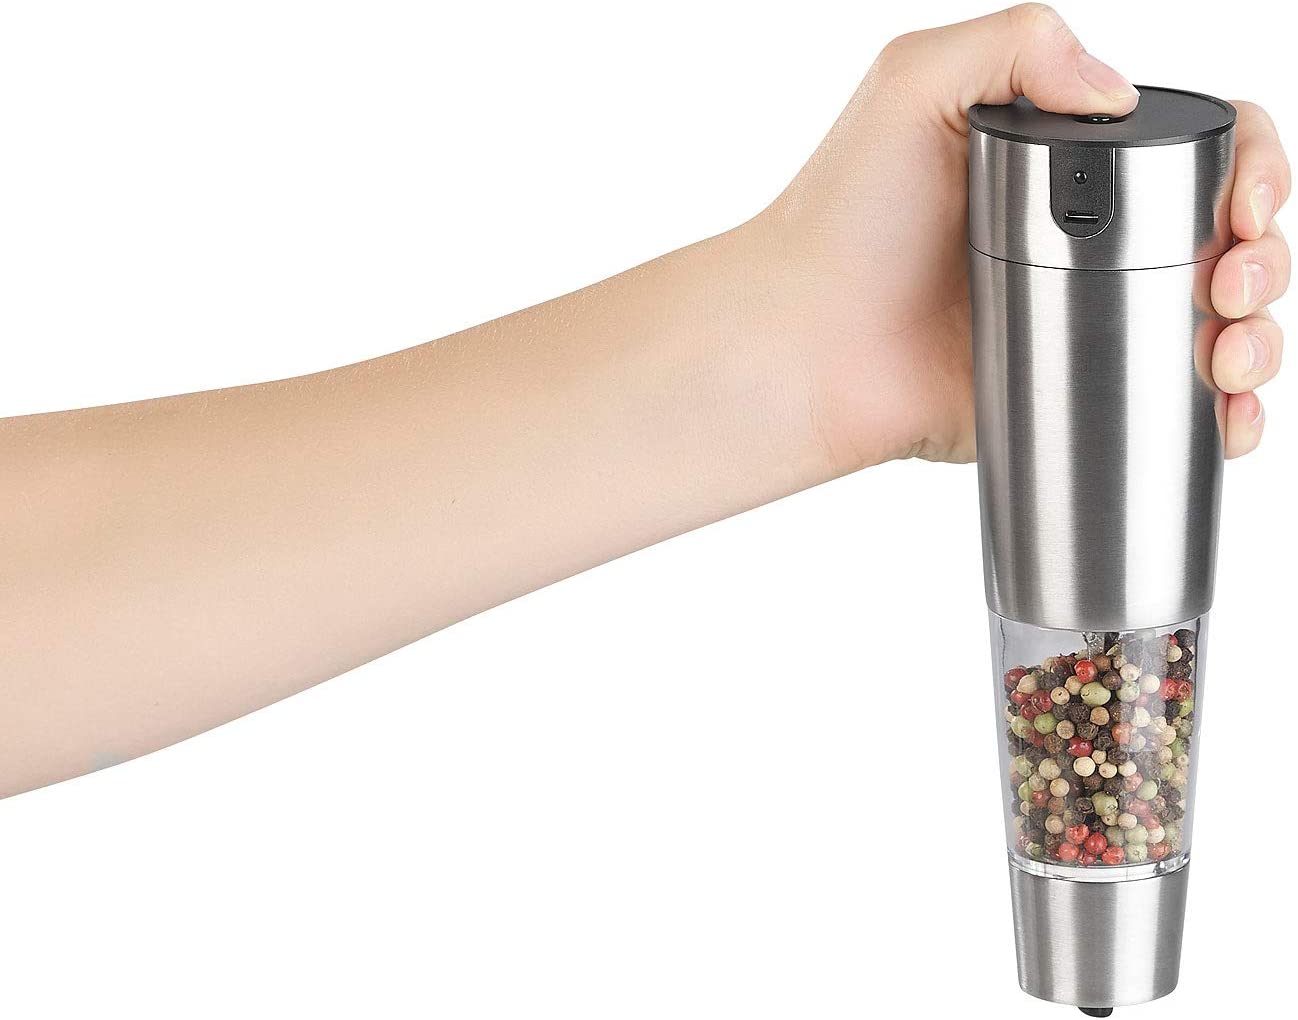 Rosenstein & Söhne Pepper mill: automatic cordless spice mill with ceramic grinder, USB charging function (pepper mill rechargeable battery)